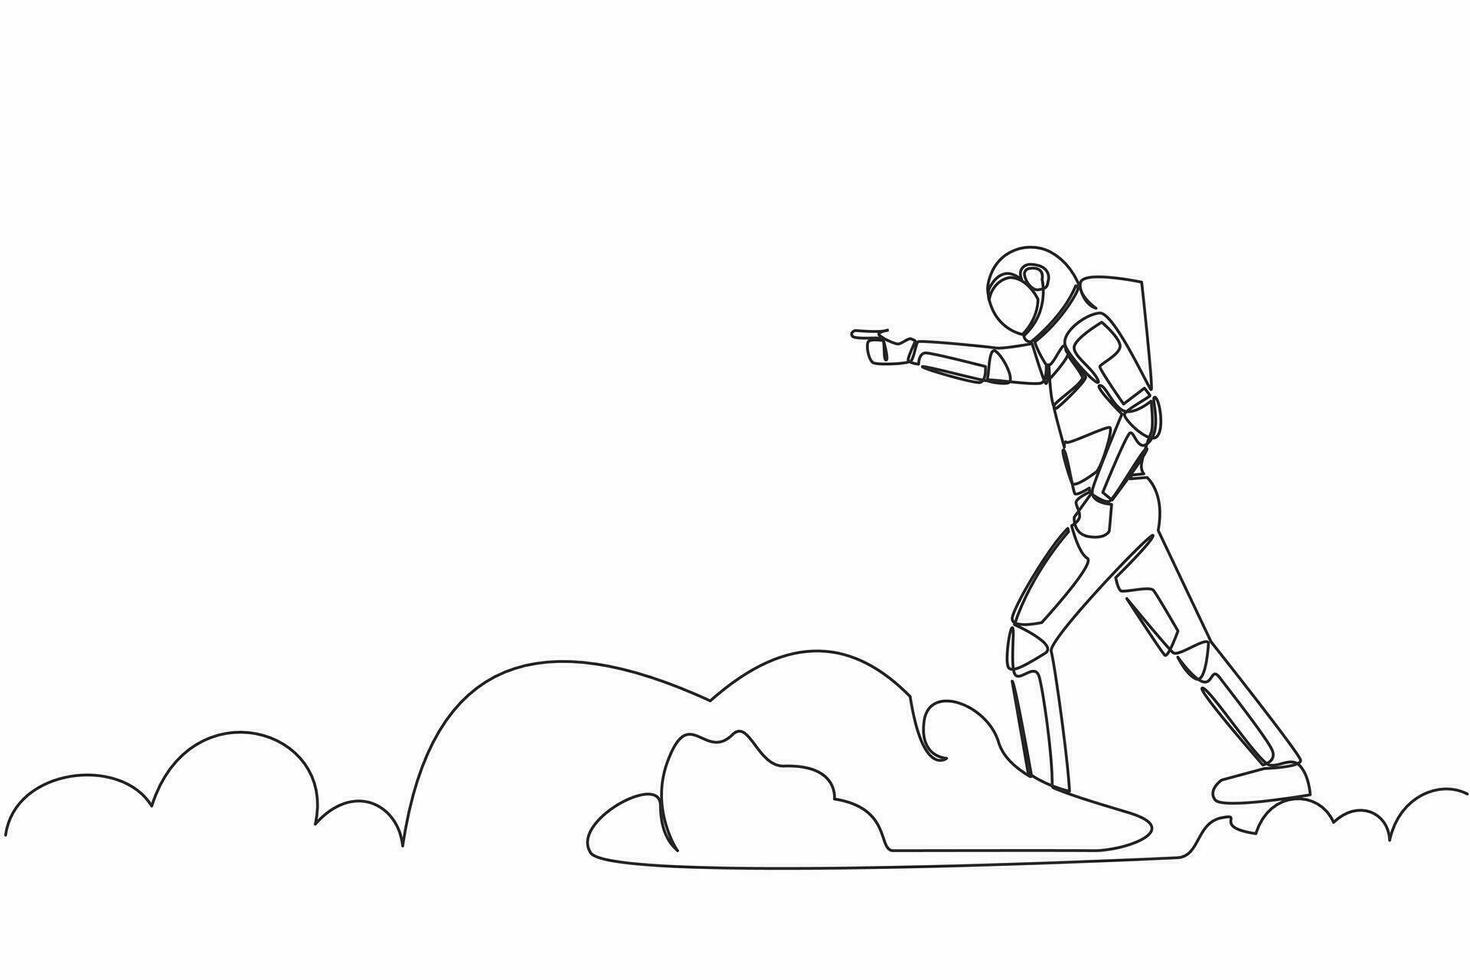 Single one line drawing young astronaut riding cloud on sky, pointing forward, go to future innovation of space industry. Cosmic galaxy space. Continuous line draw graphic design vector illustration